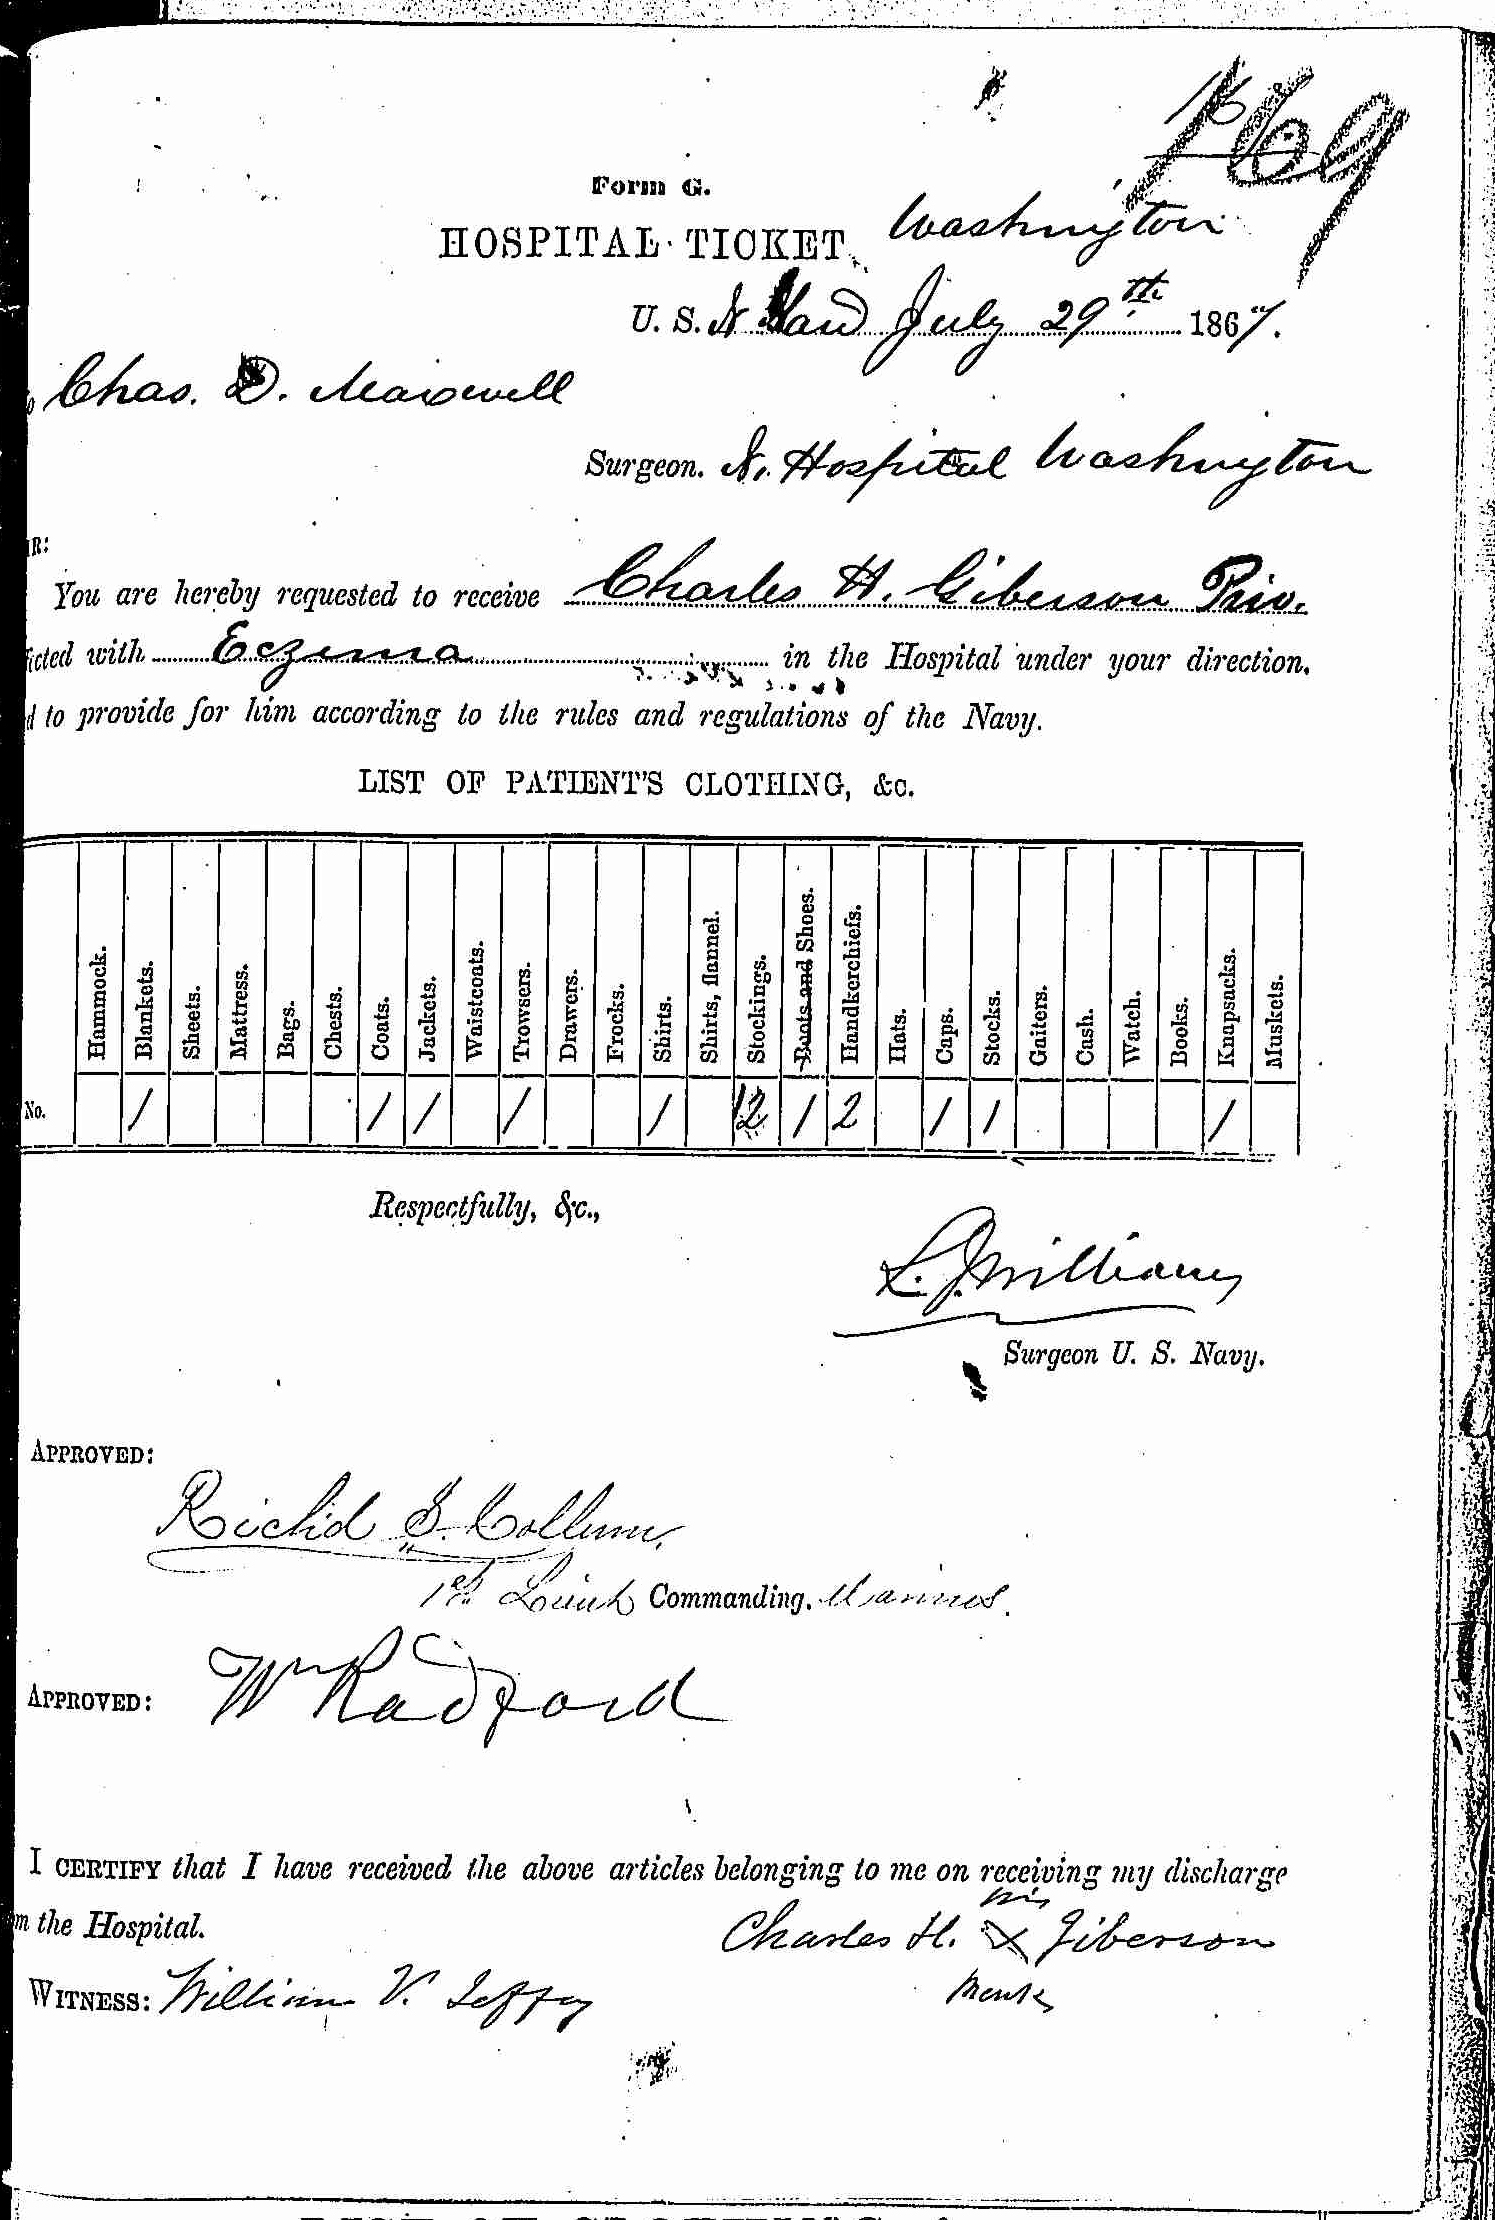 Entry for Charles H. Giberson (second admission page 1 of 2) in the log Hospital Tickets and Case Papers - Naval Hospital - Washington, D.C. - 1866-68